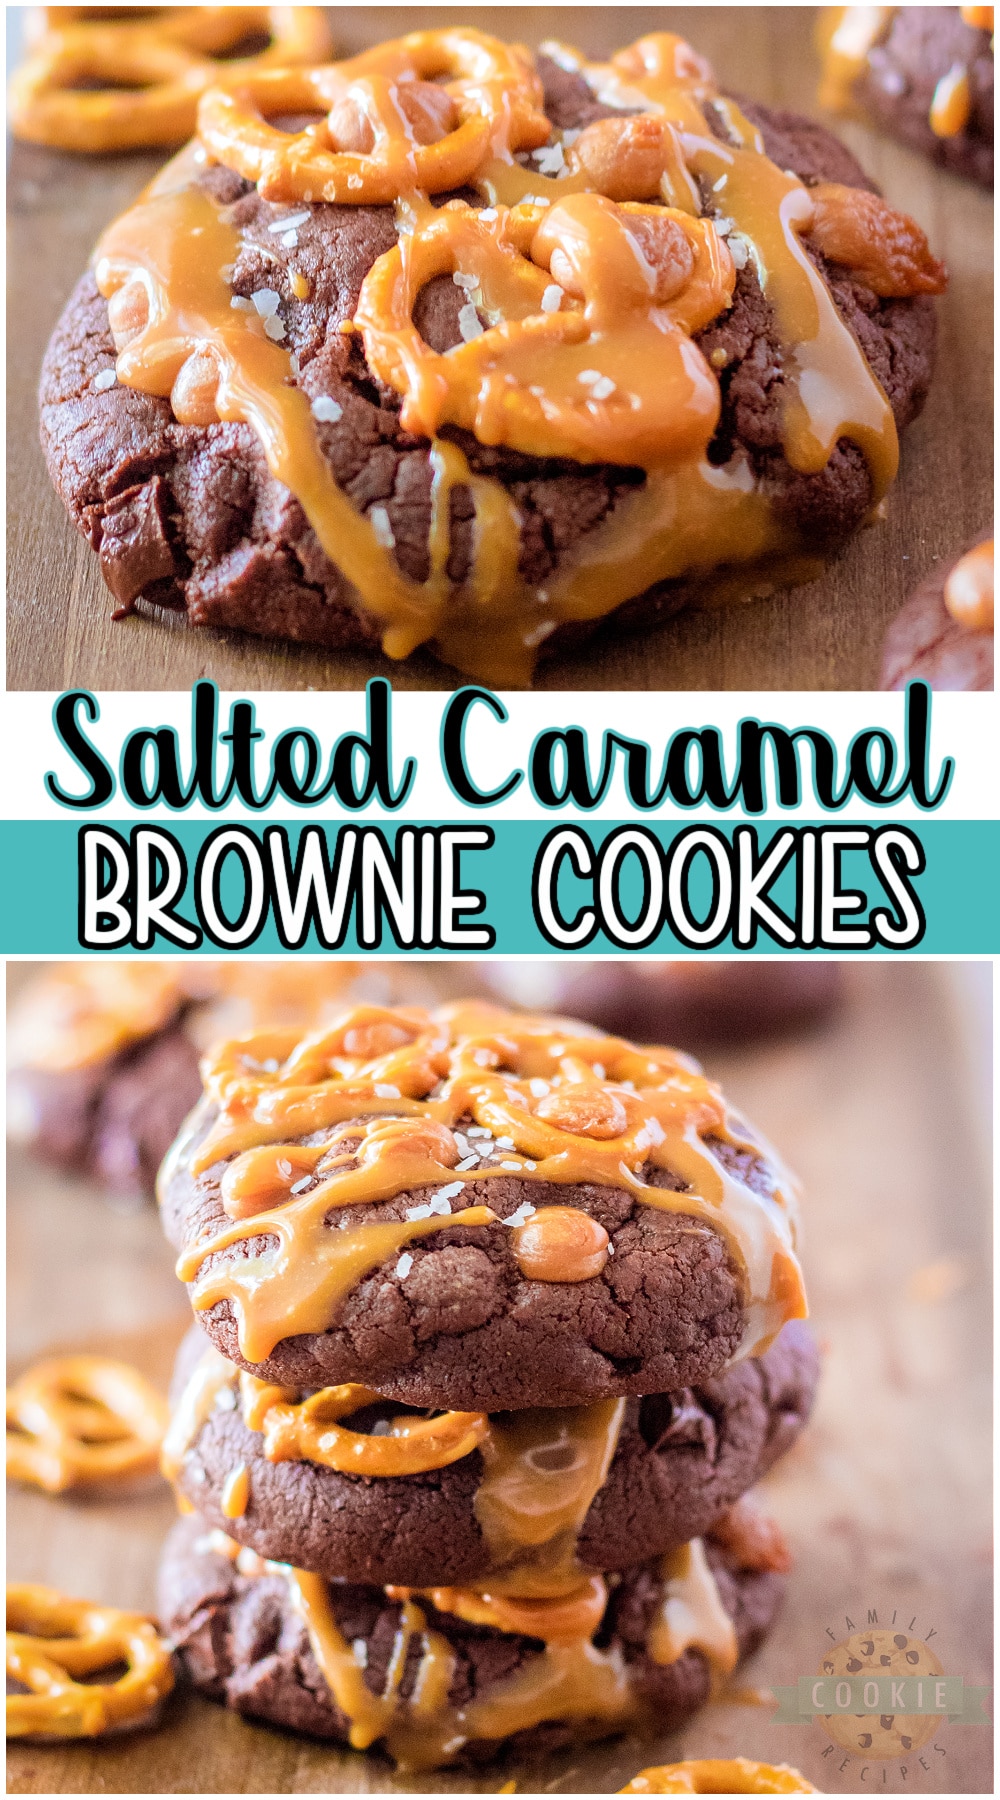 Salted Caramel Brownie Cookies are an indulgent cookie recipe loaded with chocolate & caramel! Salty sweet perfection in a wonderful homemade cookie recipe that everyone loves! #brownie #cookies #caramel #baking #dessert #easyrecipe from FAMILY COOKIE RECIPES via @buttergirls